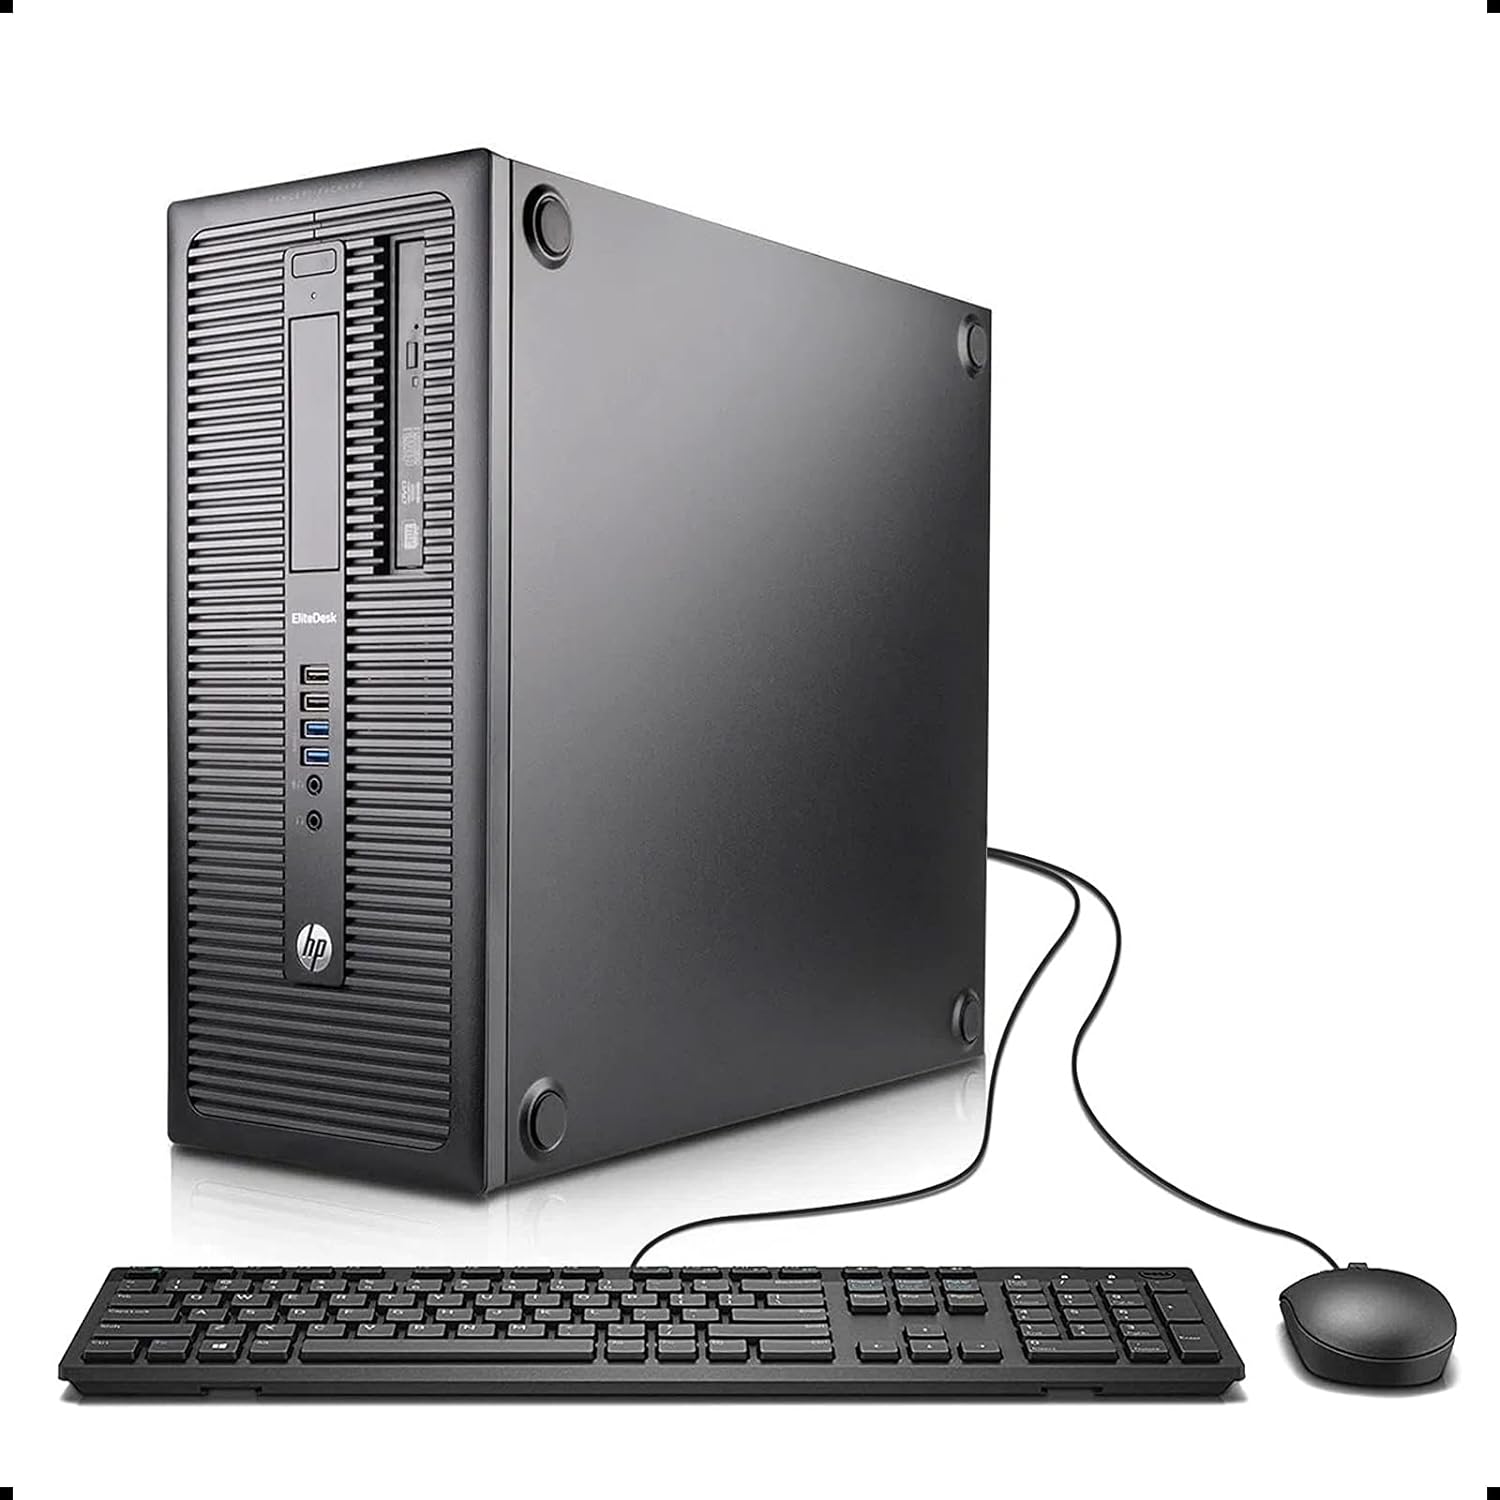 HP EliteDesk 800 G1 Small Form Business High Performance Desktop Computer PC (Intel Core i5 4570 up to 3.9GHz, 16G RAM, 120G SSD+1T HDD, DVD-ROM, WiFi, DP, Windows 10 Professional) (Renewed)